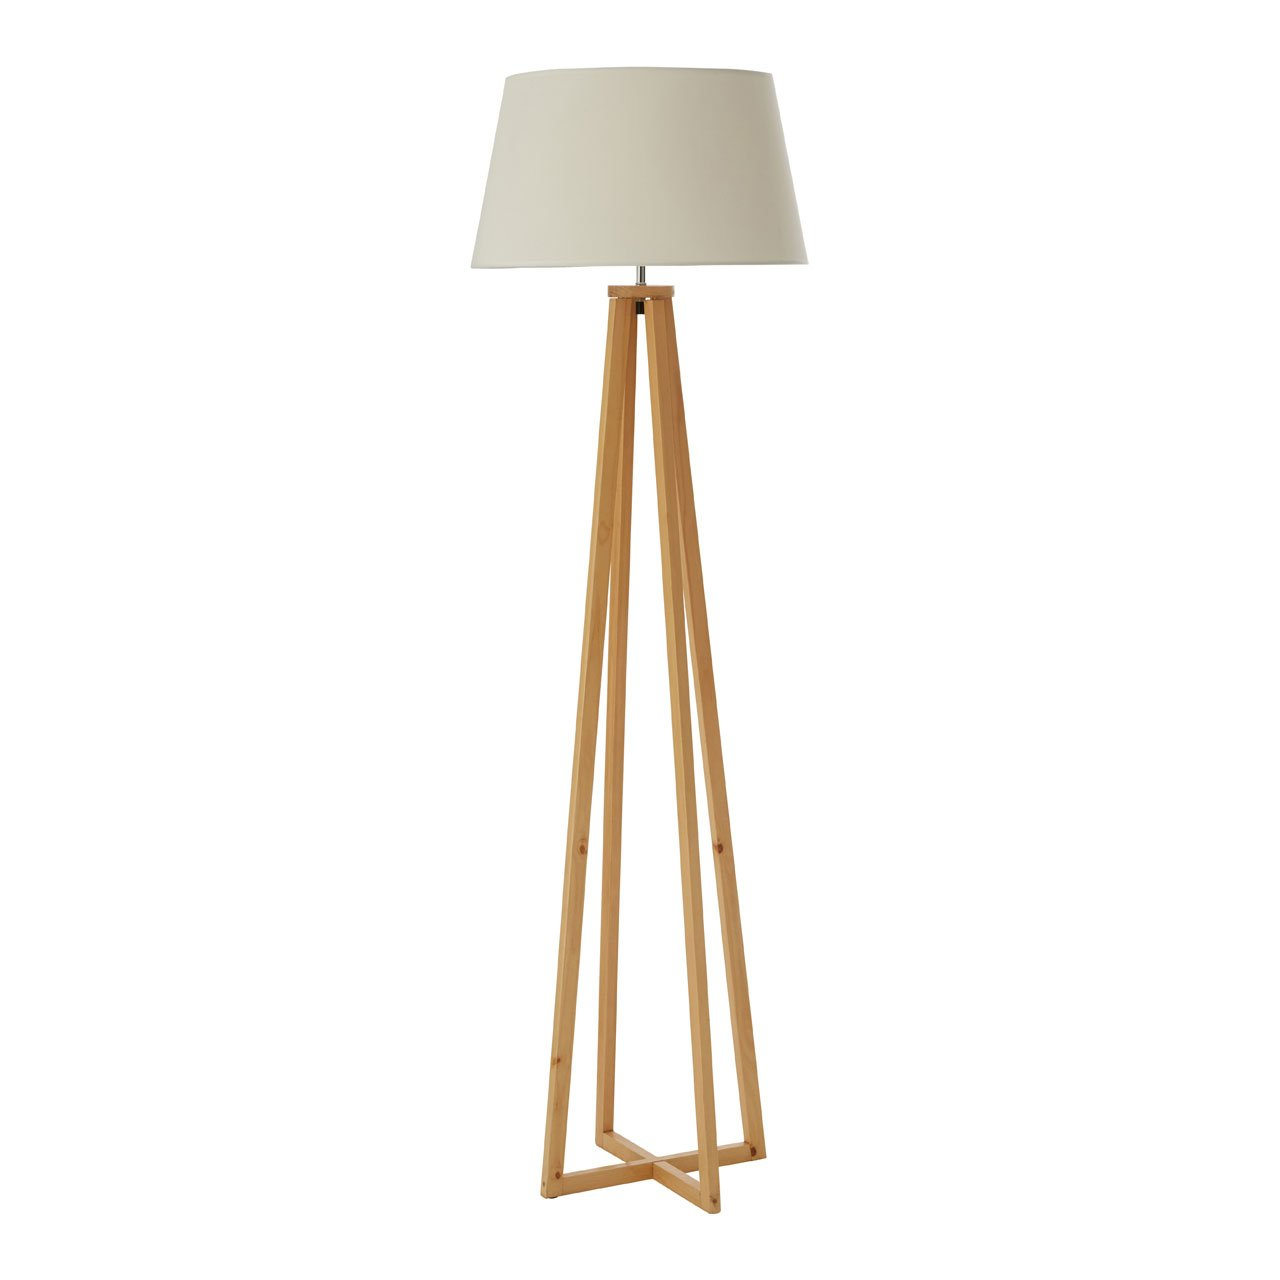 Breton Wooden Floor Lamp With Natural Fabric Shade within sizing 1280 X 1280